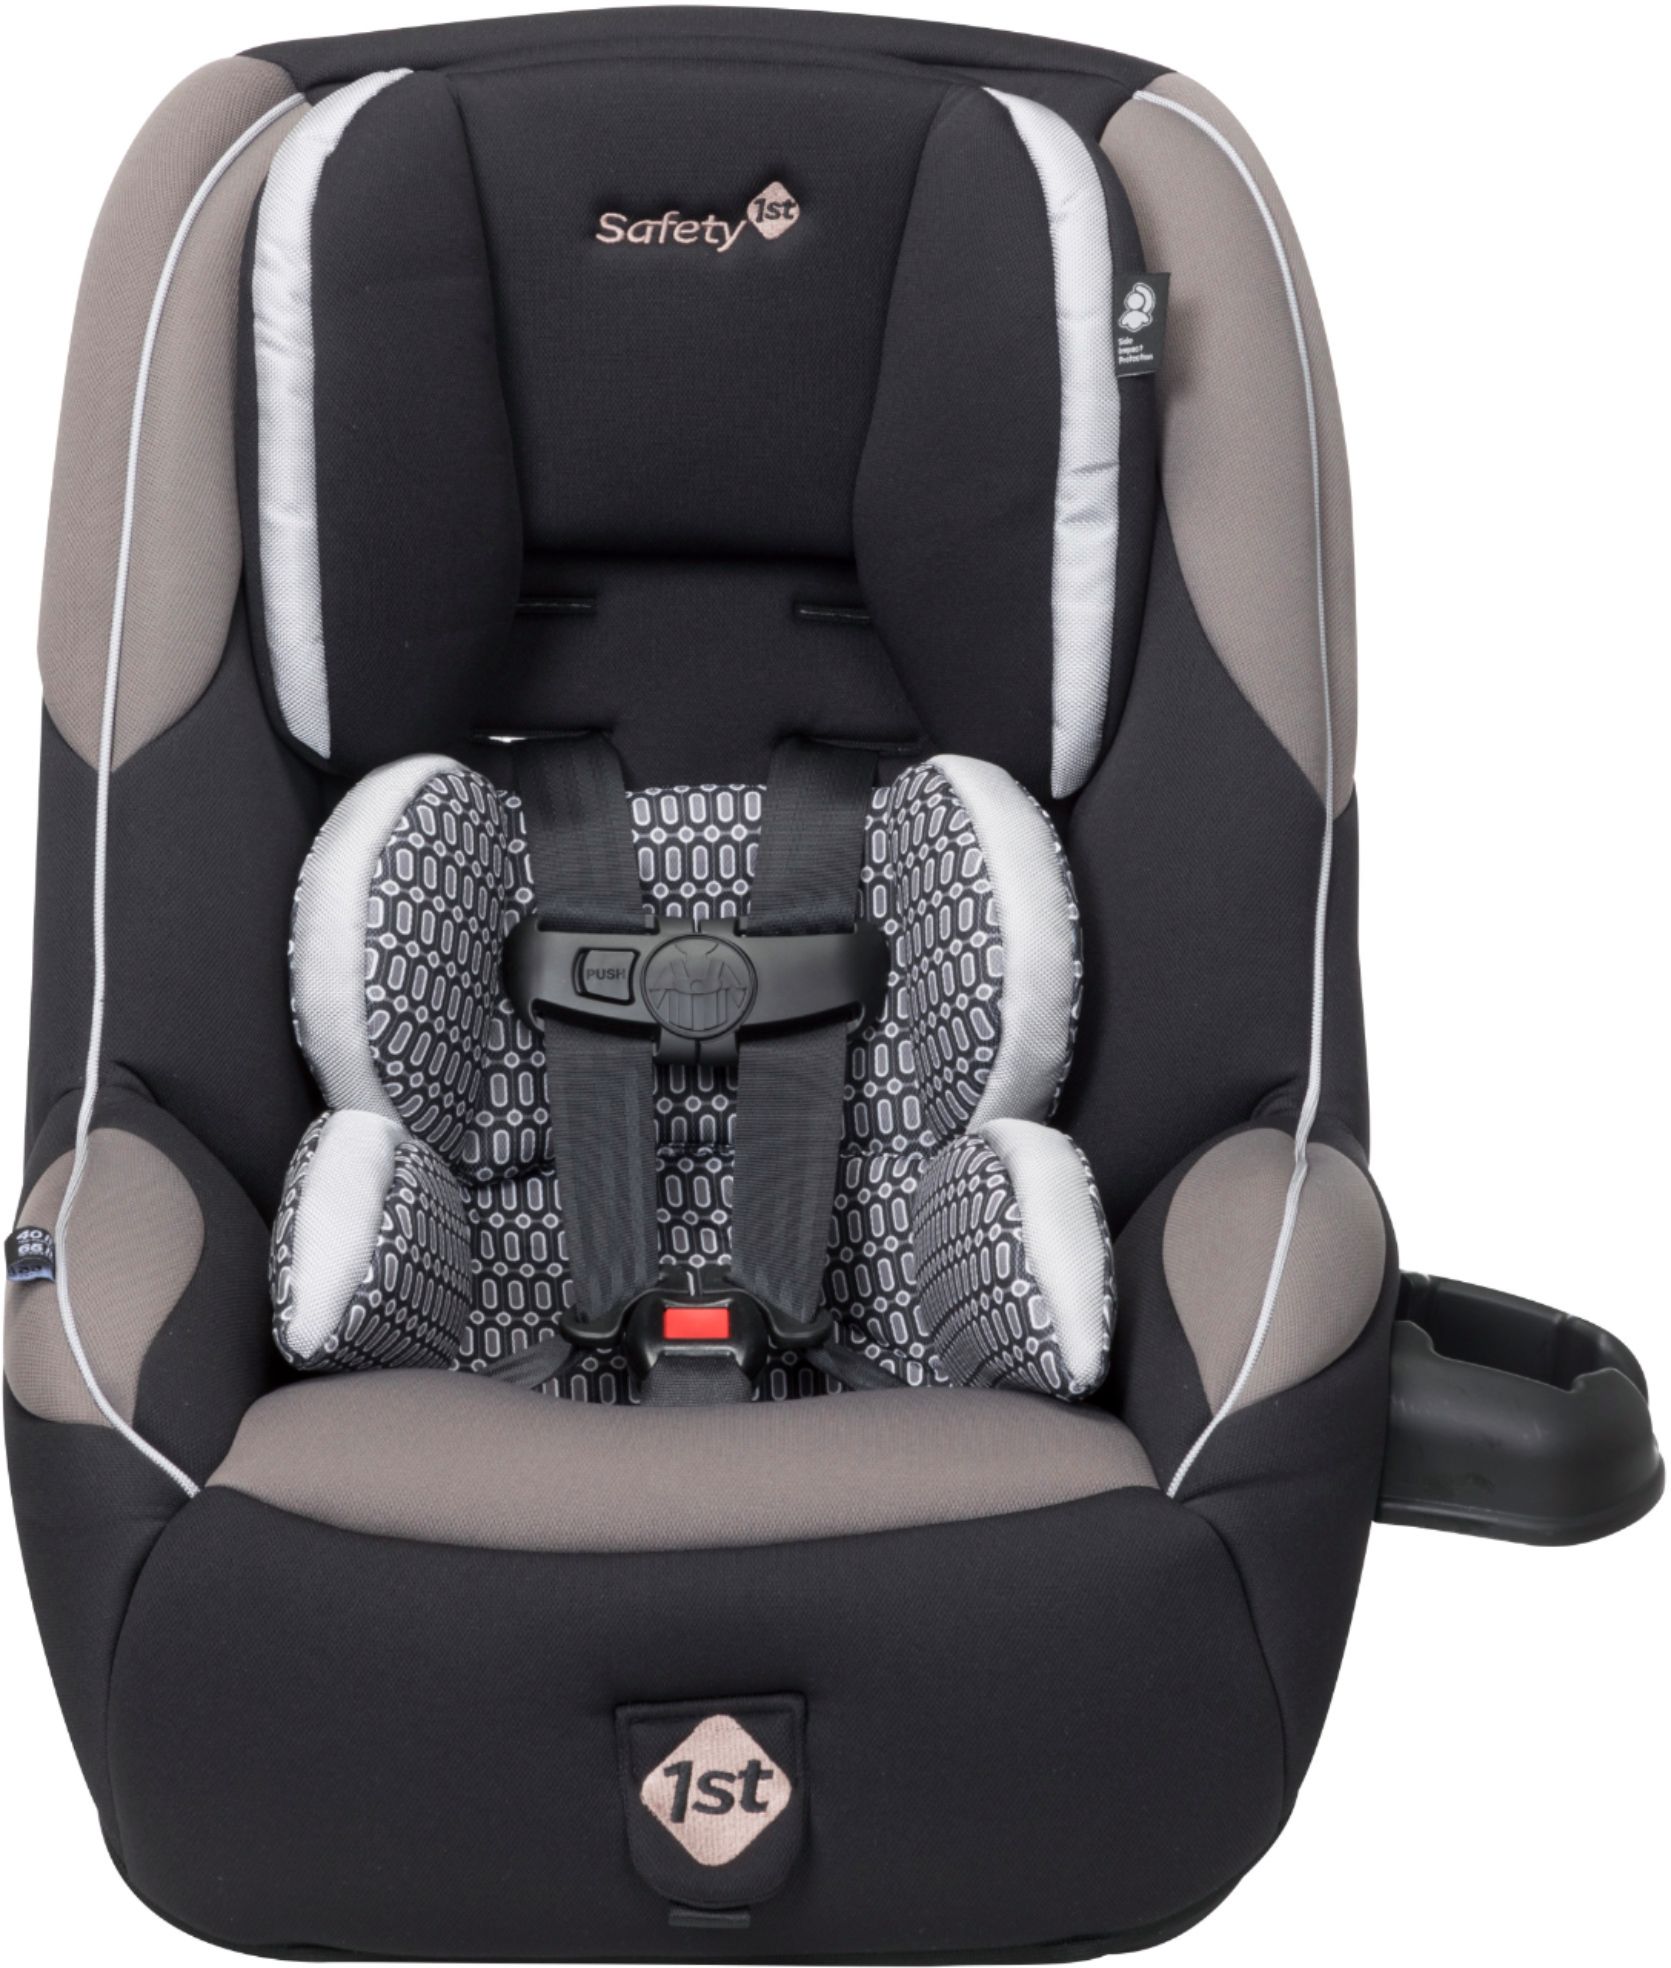 Safety 1st - Guide 65 Convertible Car Seat - Chambers